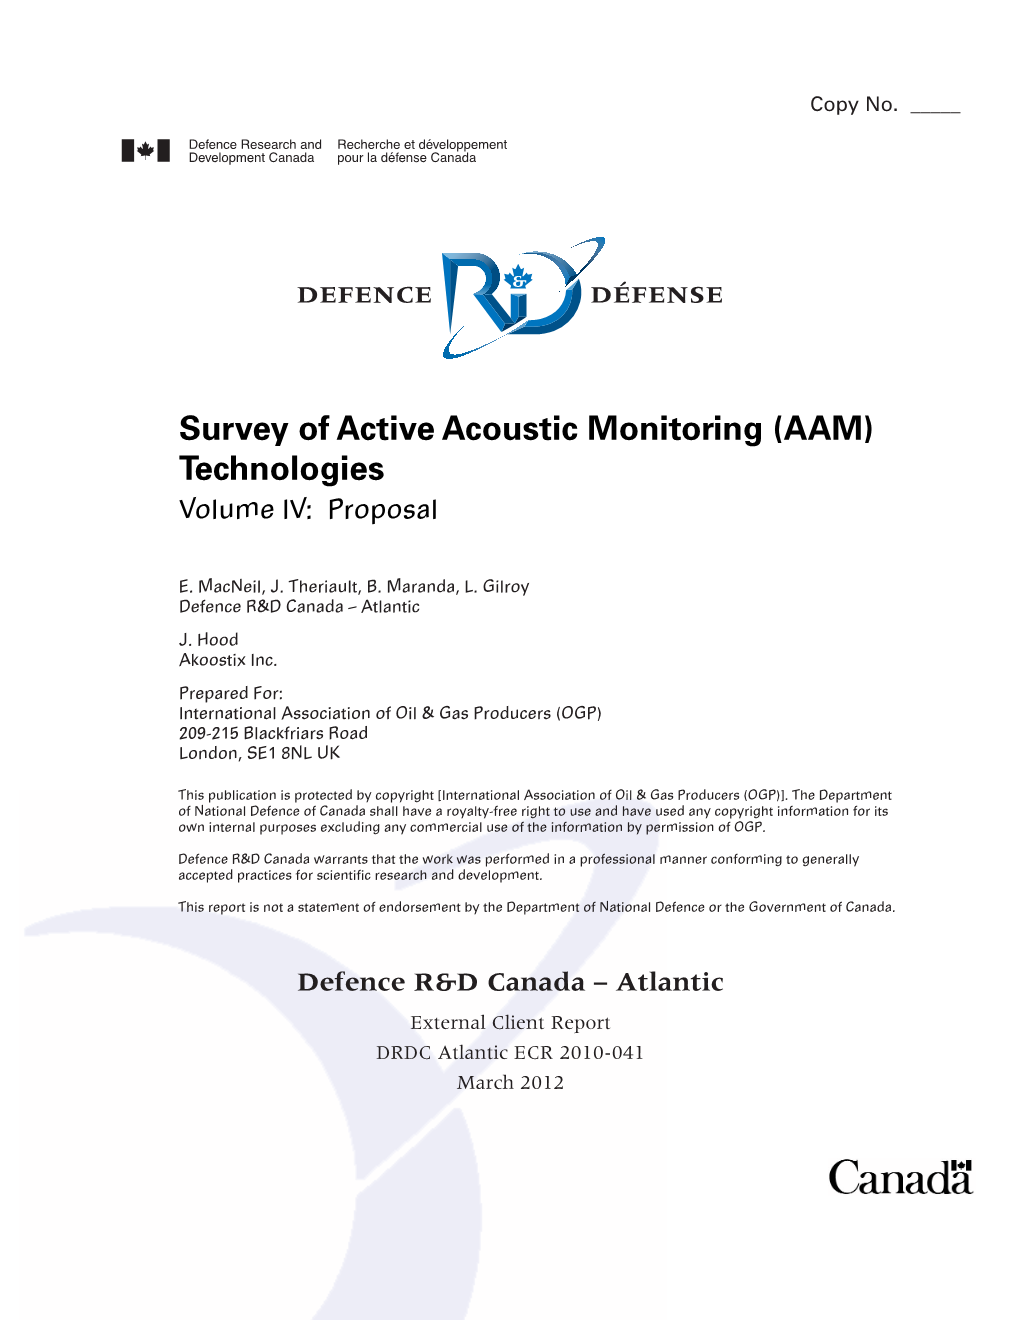 Survey of Active Acoustic Monitoring (AAM) Technologies Volume IV: Proposal